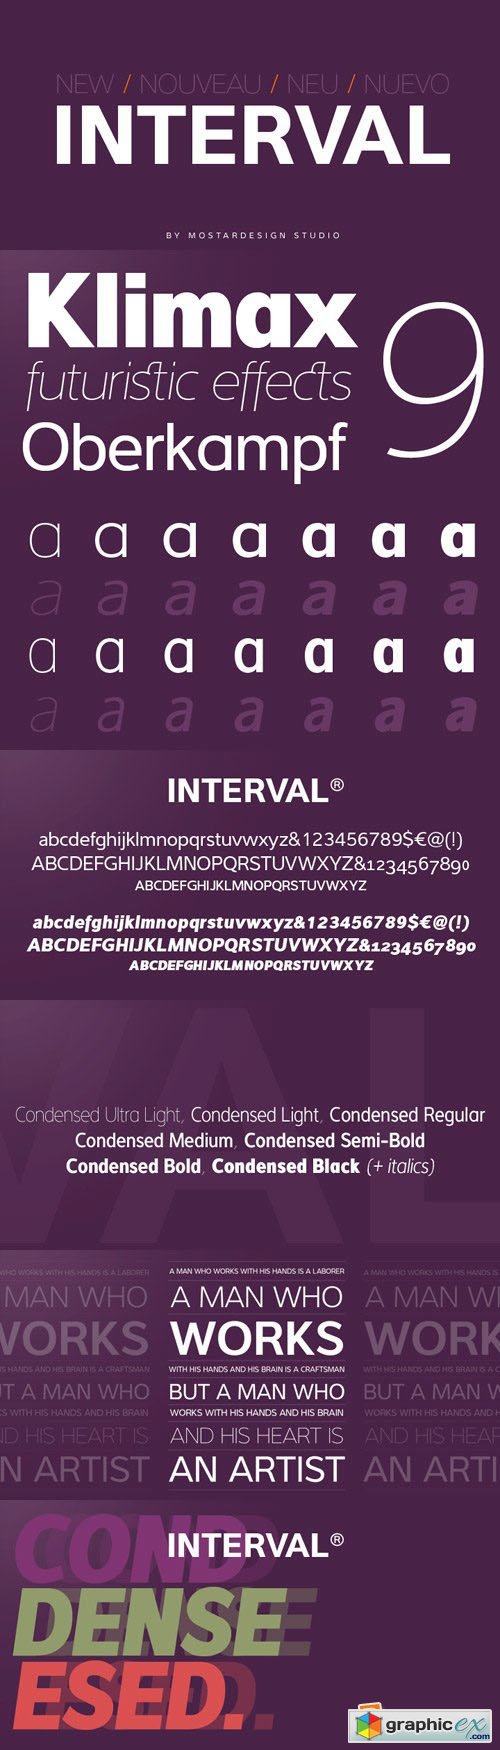 Interval Sans Pro Font Family - 14 Fonts (Incomplete Family) for $364